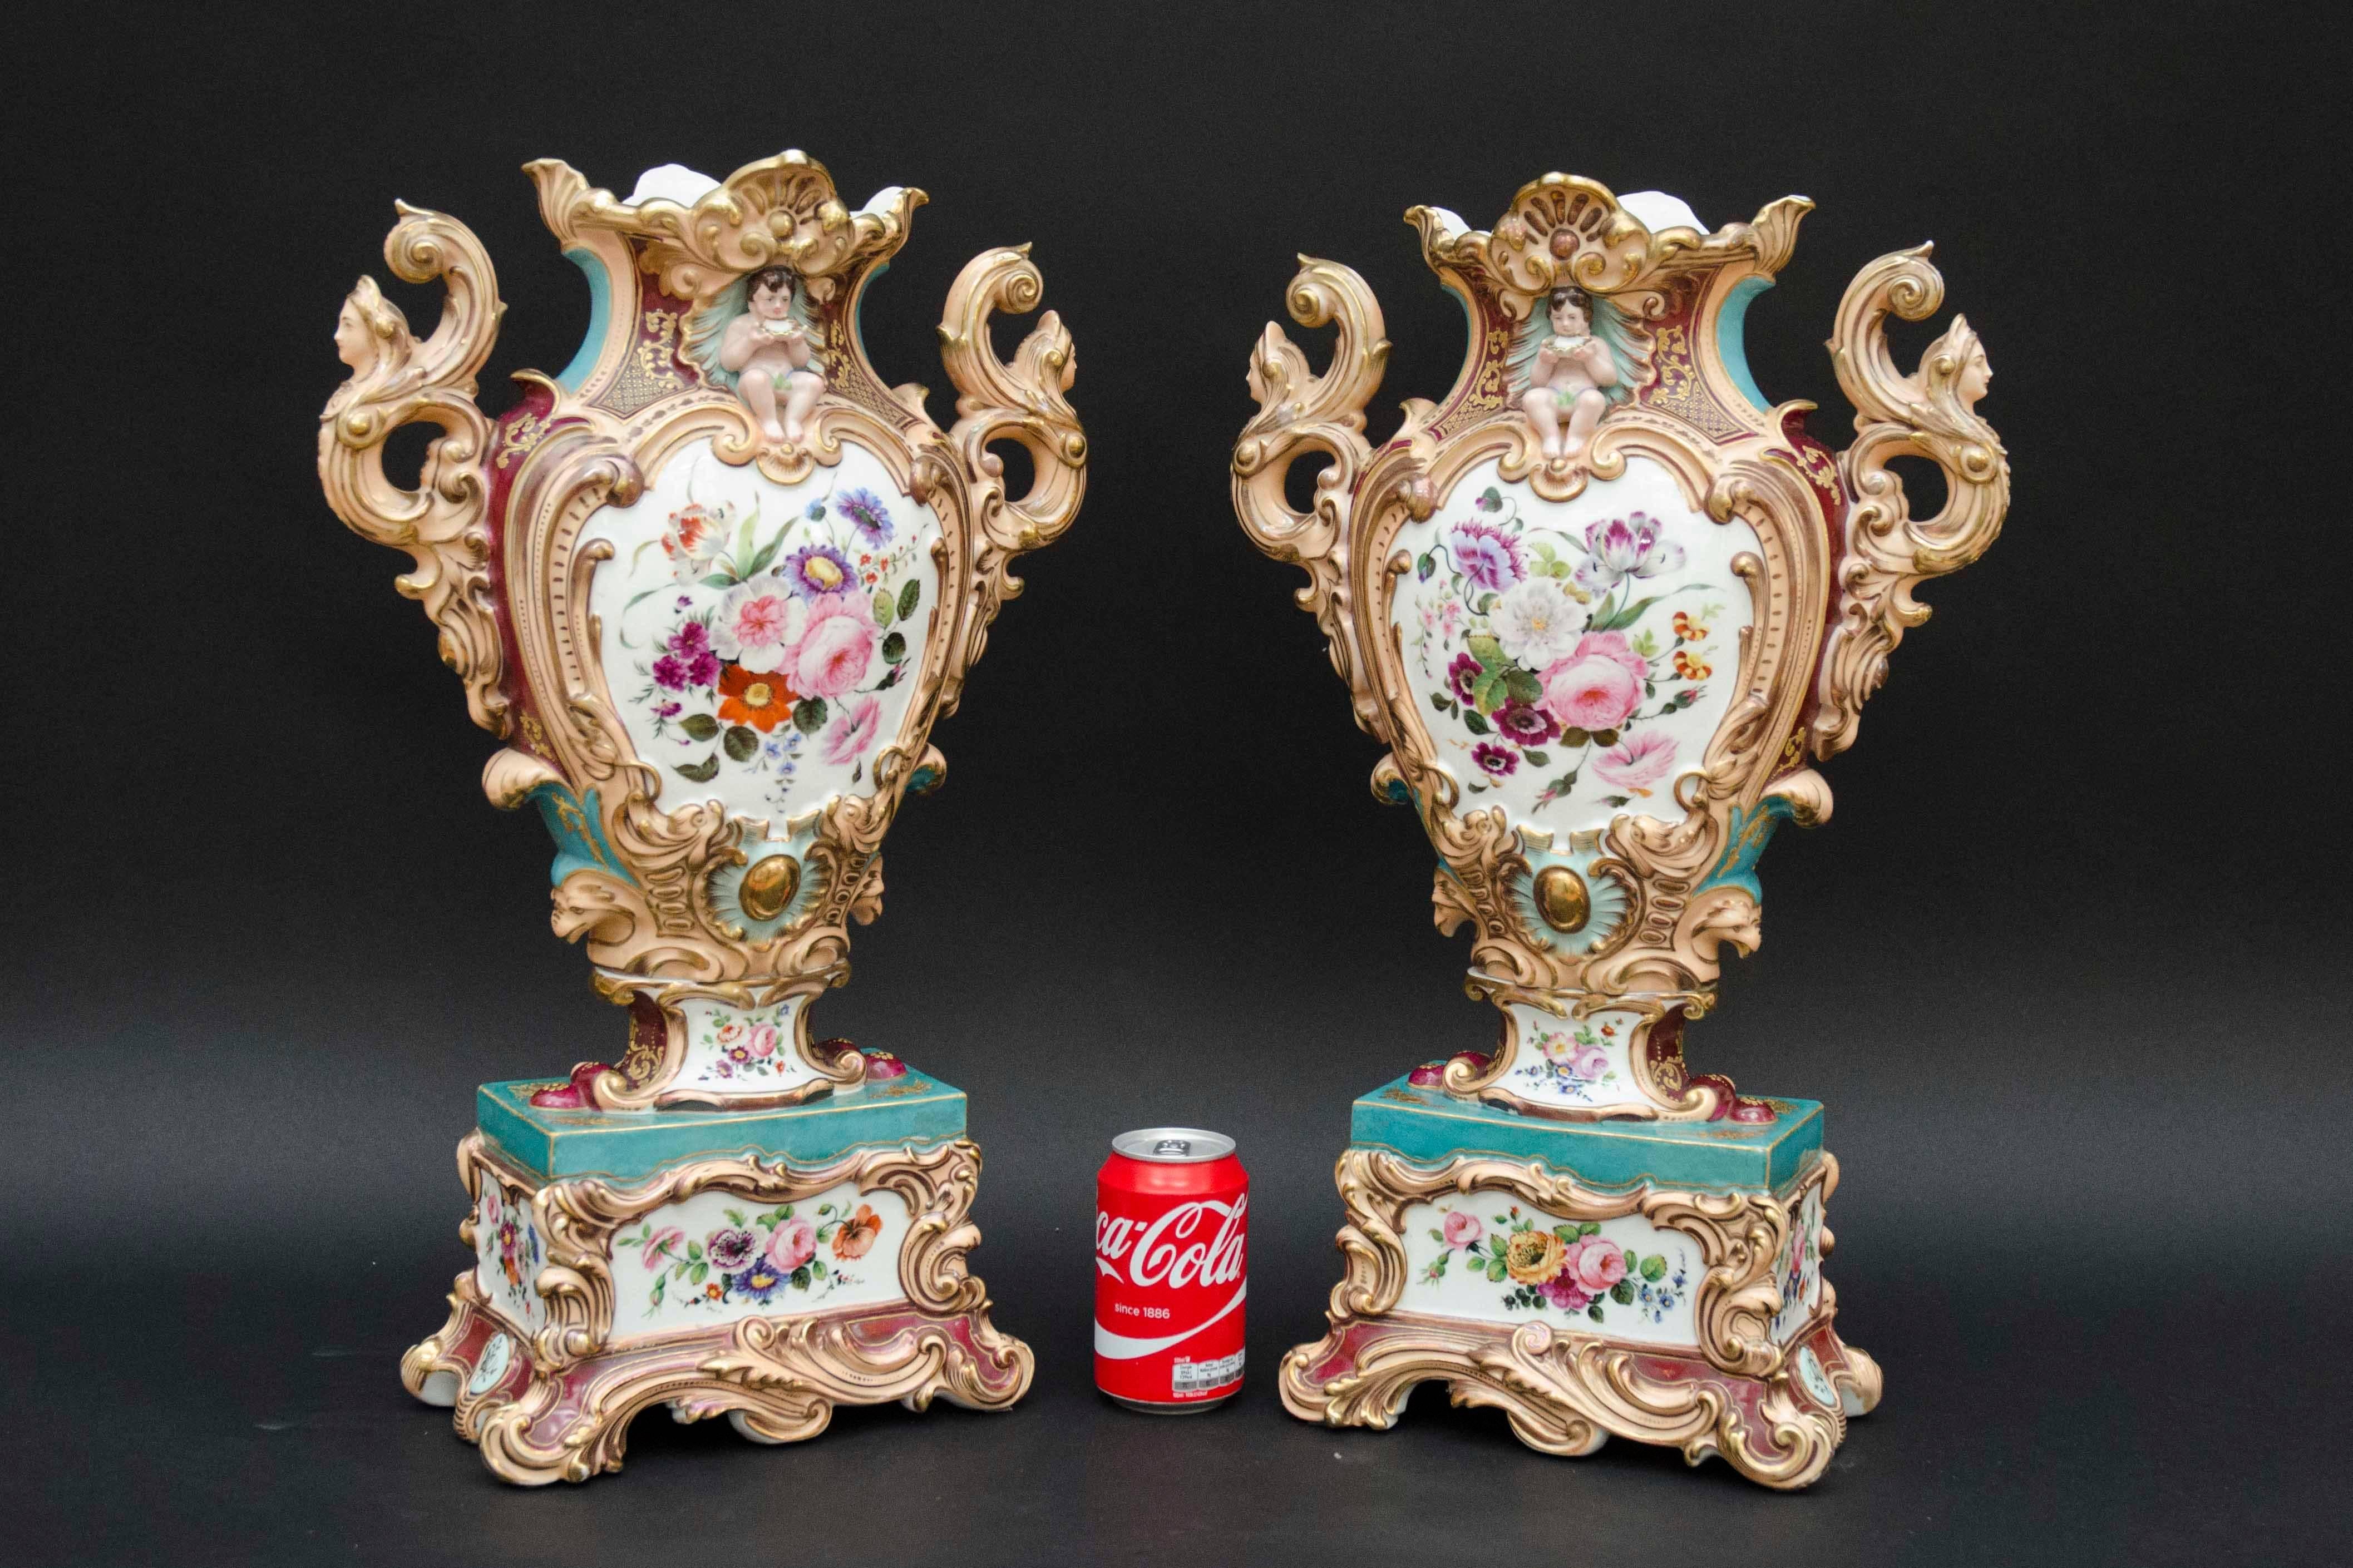 Rococo Revival 19th Century Rococo Pair of colorfull Vases, attributed to Jacob Petit in Paris For Sale